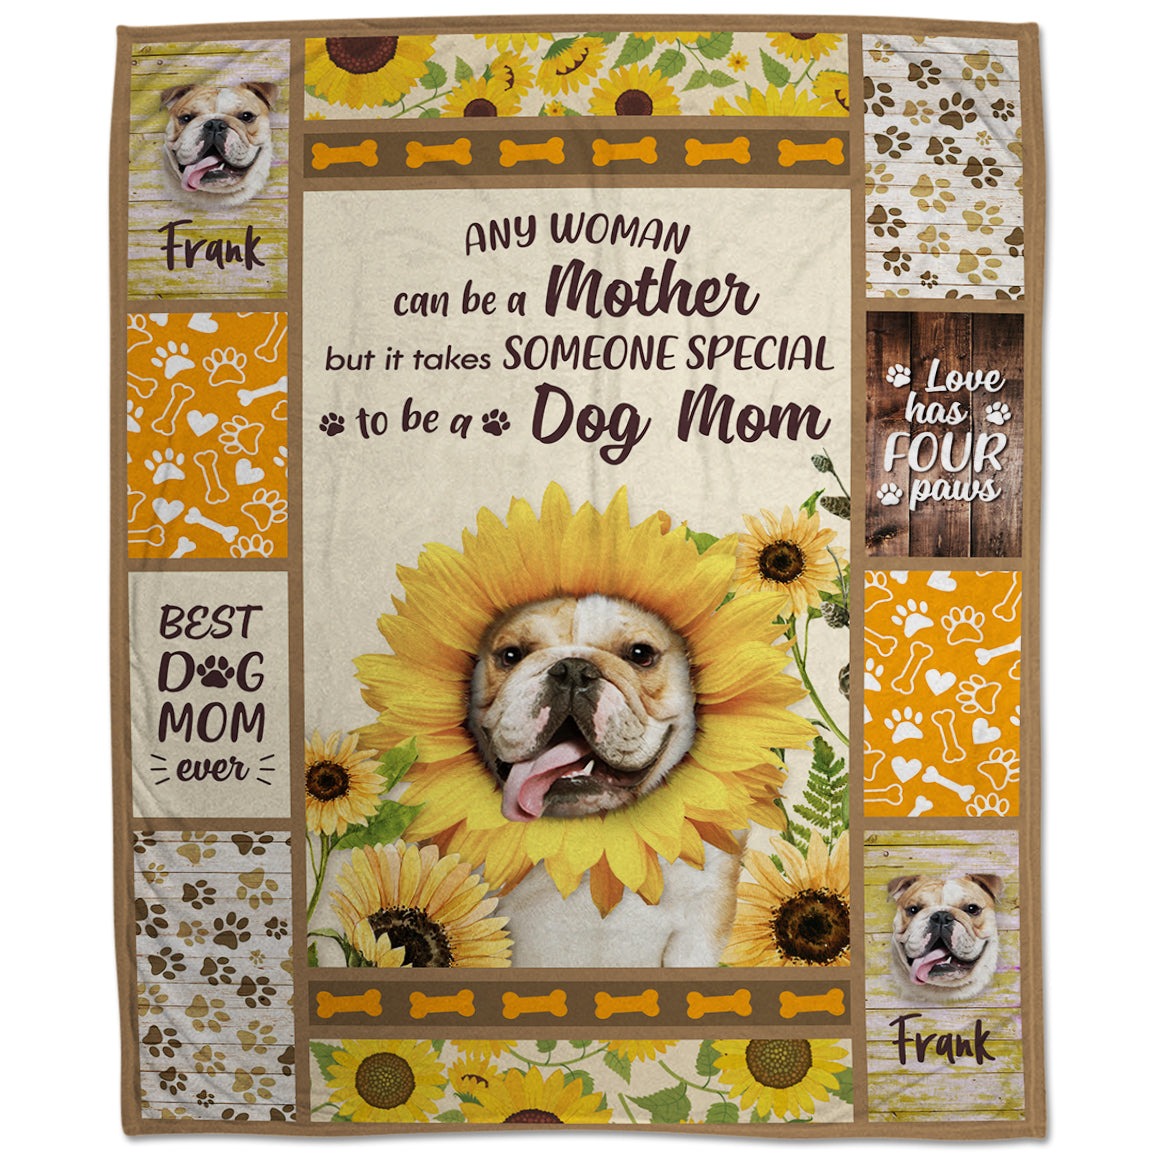 Customized Blanket With Pet Face - Best Dog Mom Ever, Special Dog Mom Custom Pet Blanket - Personalized Gift For Pet Lovers, Puppy Lovers, Dog Mom